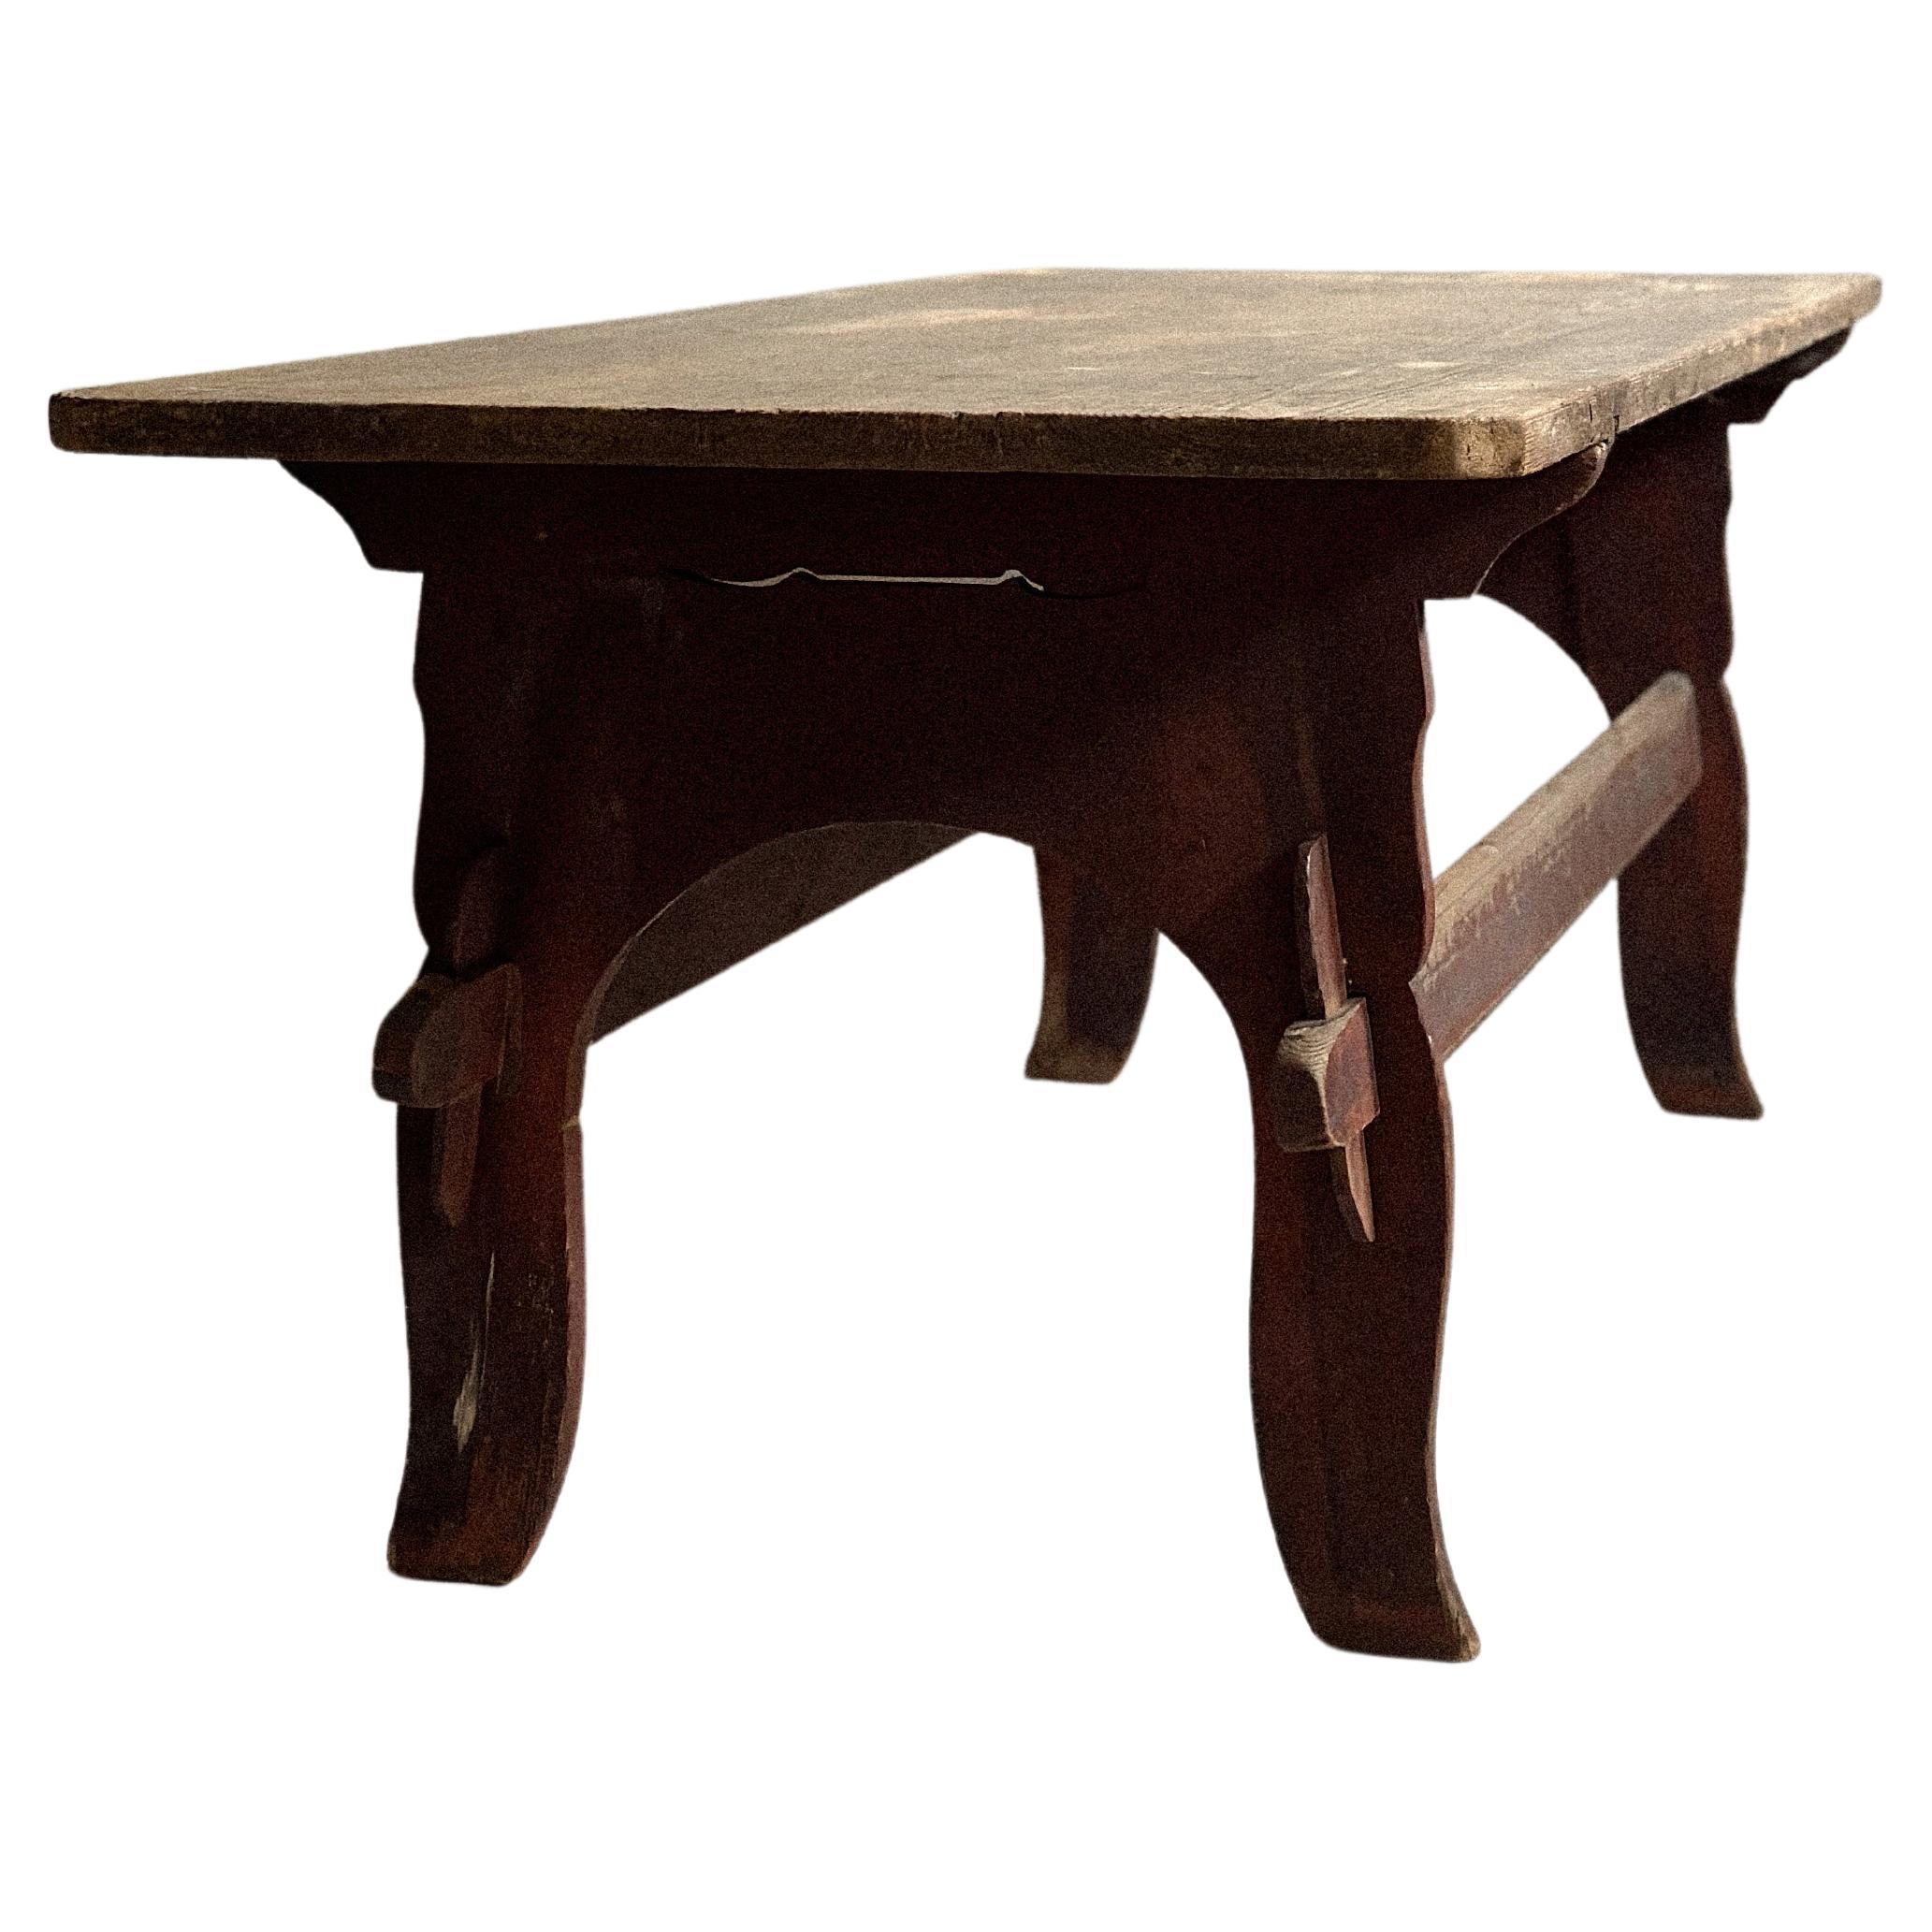 Antique Wabi Sabi Dining Table or Desk, Anonymous, Scandinavia c. 1800s  For Sale